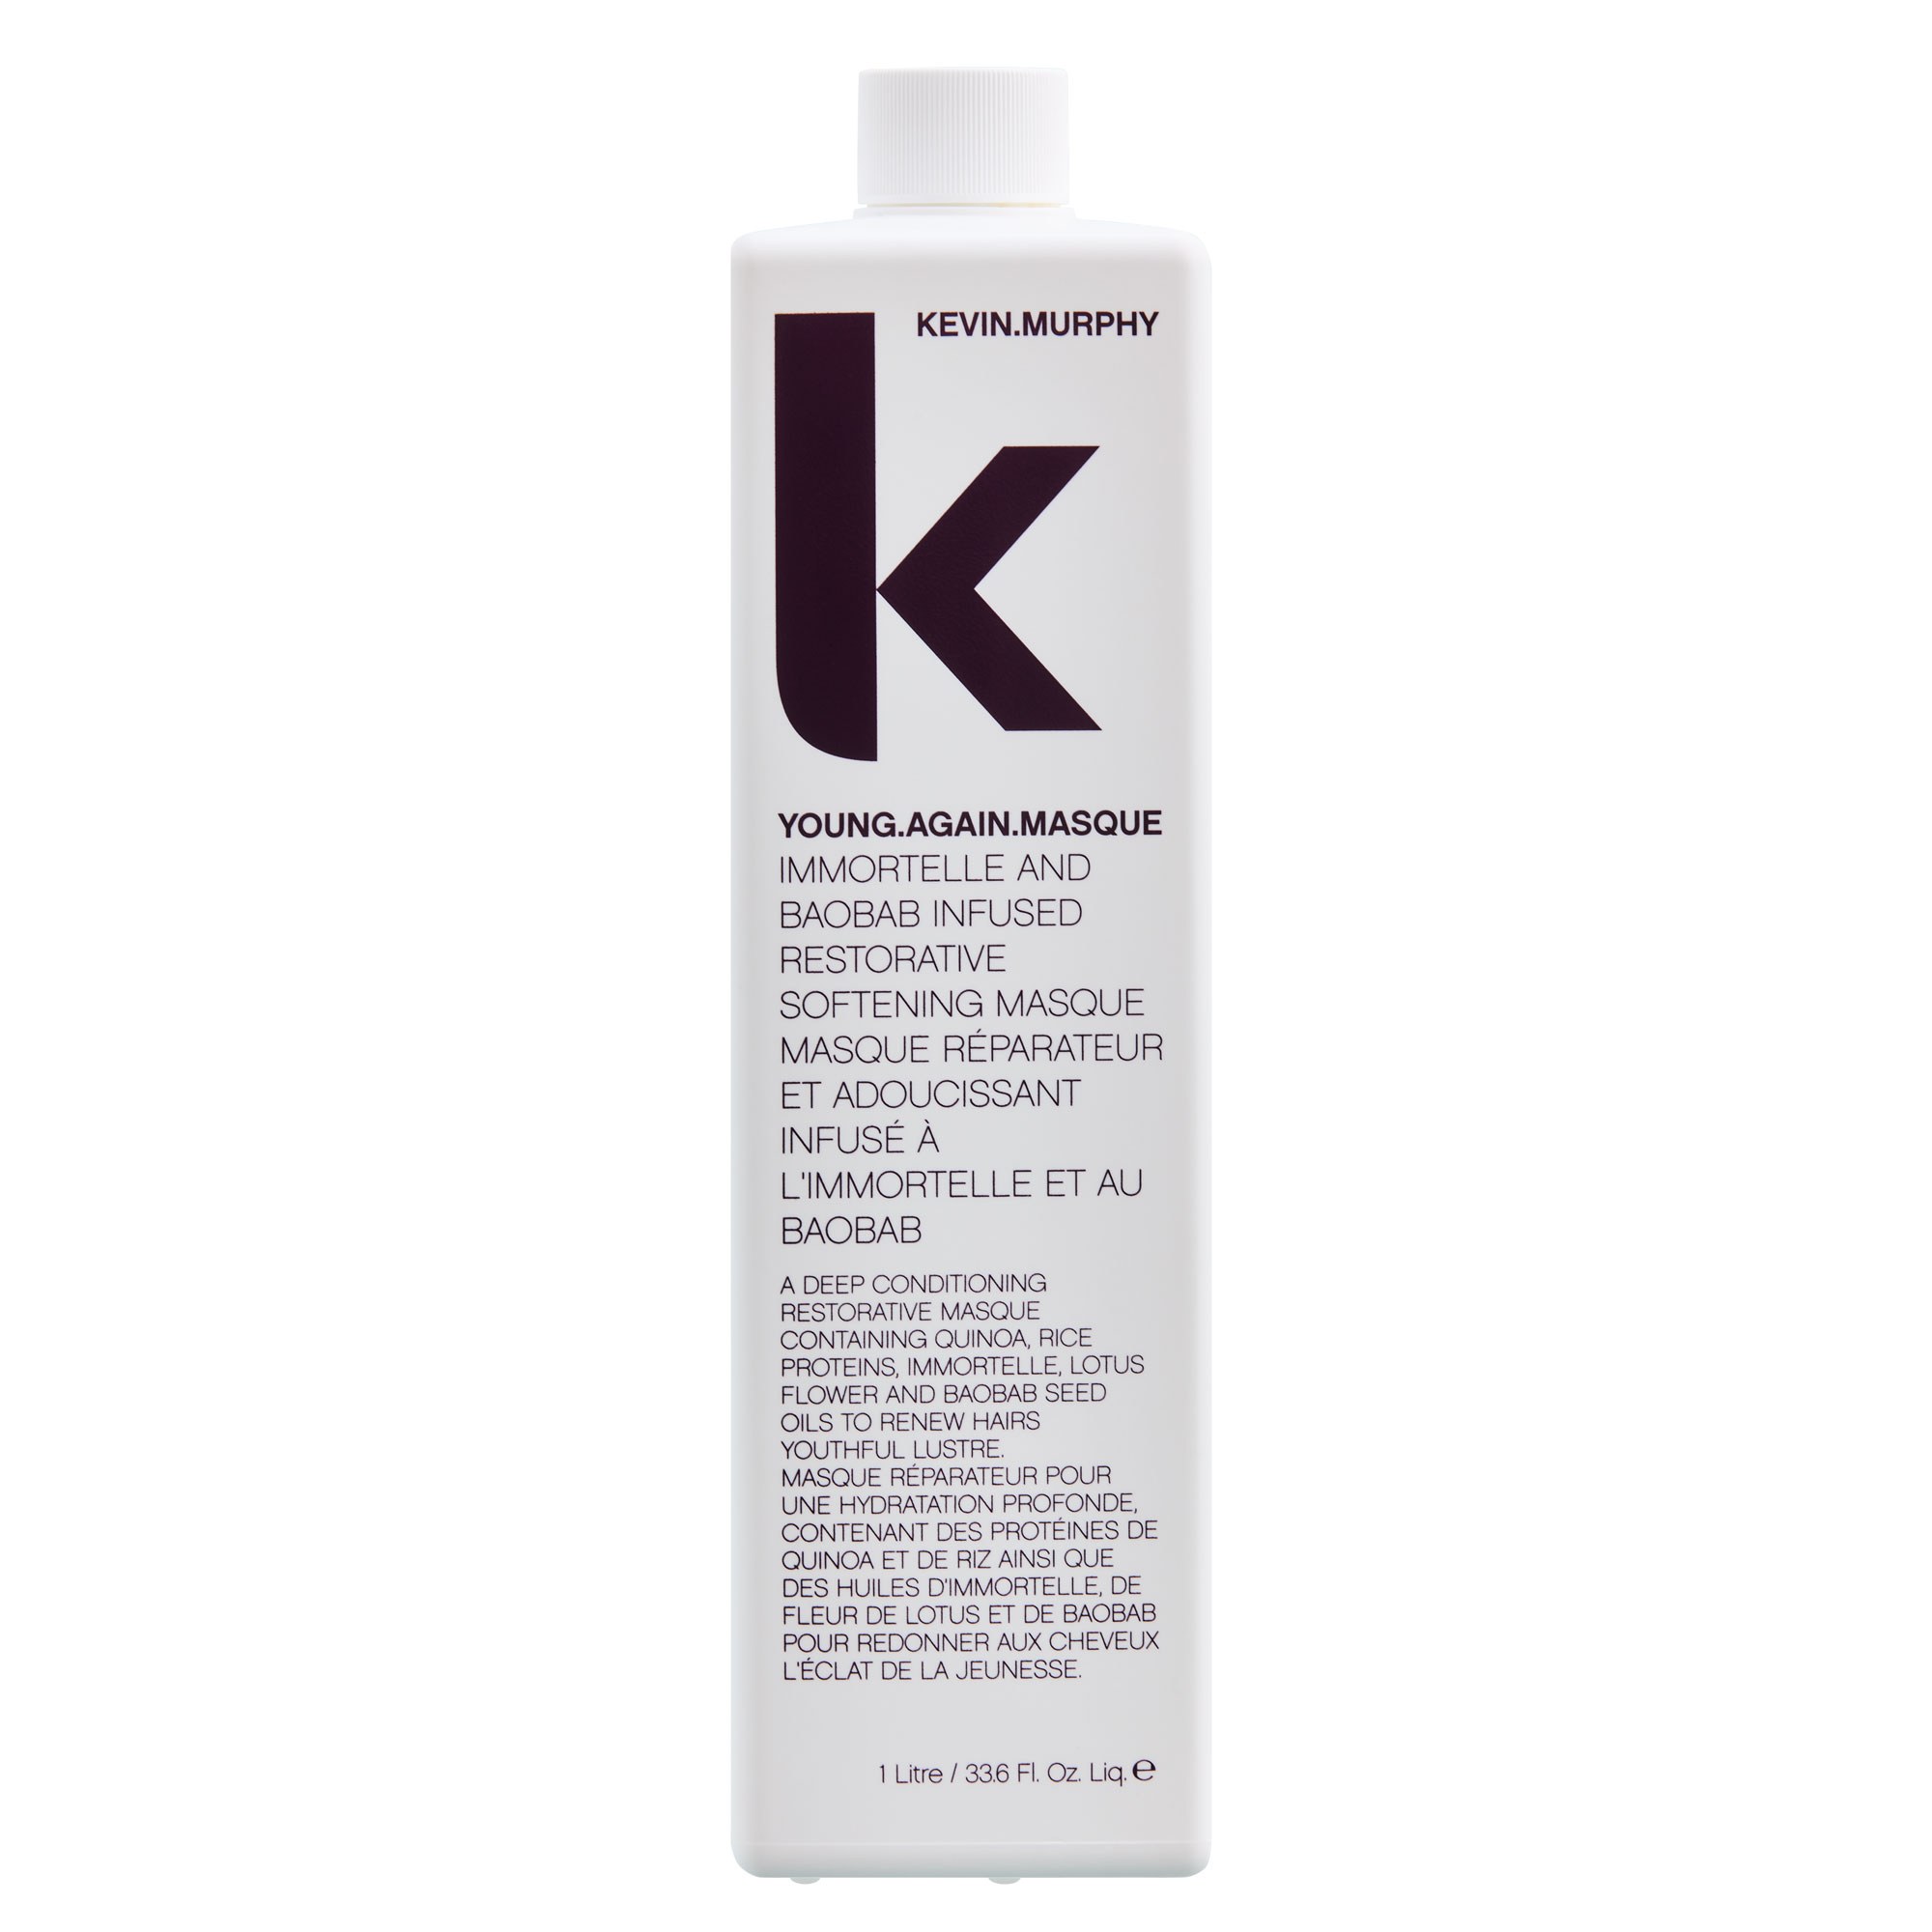 KEVIN.MURPHY YOUNG.AGAIN MASQUE